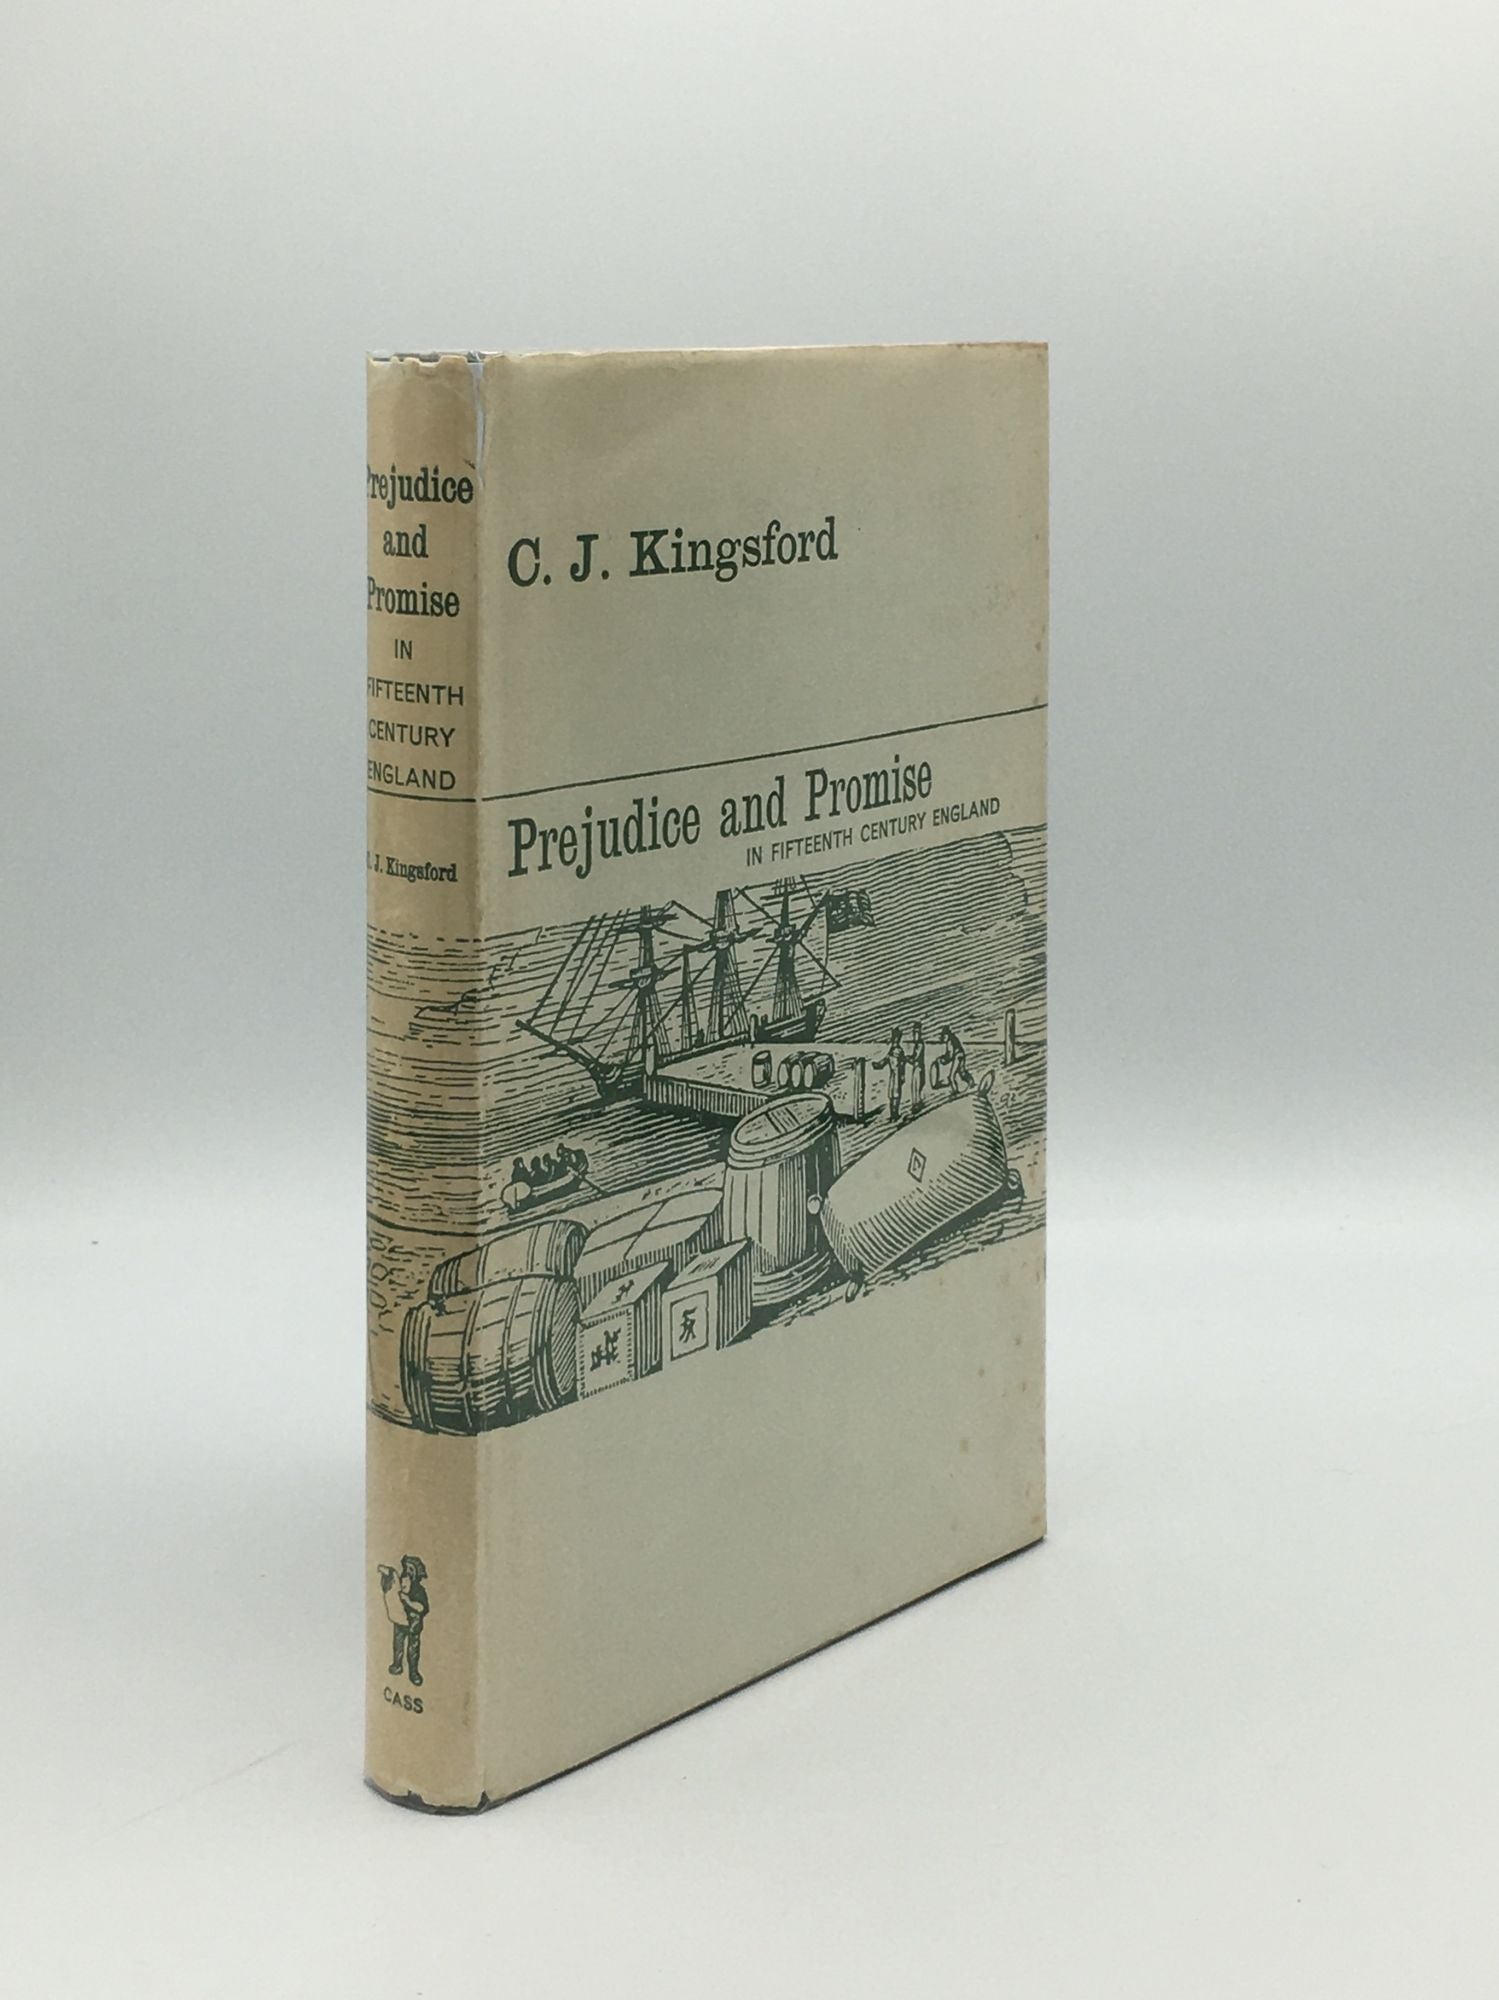 KINGSFORD C.J. - Prejudice and Promise in Fifteenth Century England